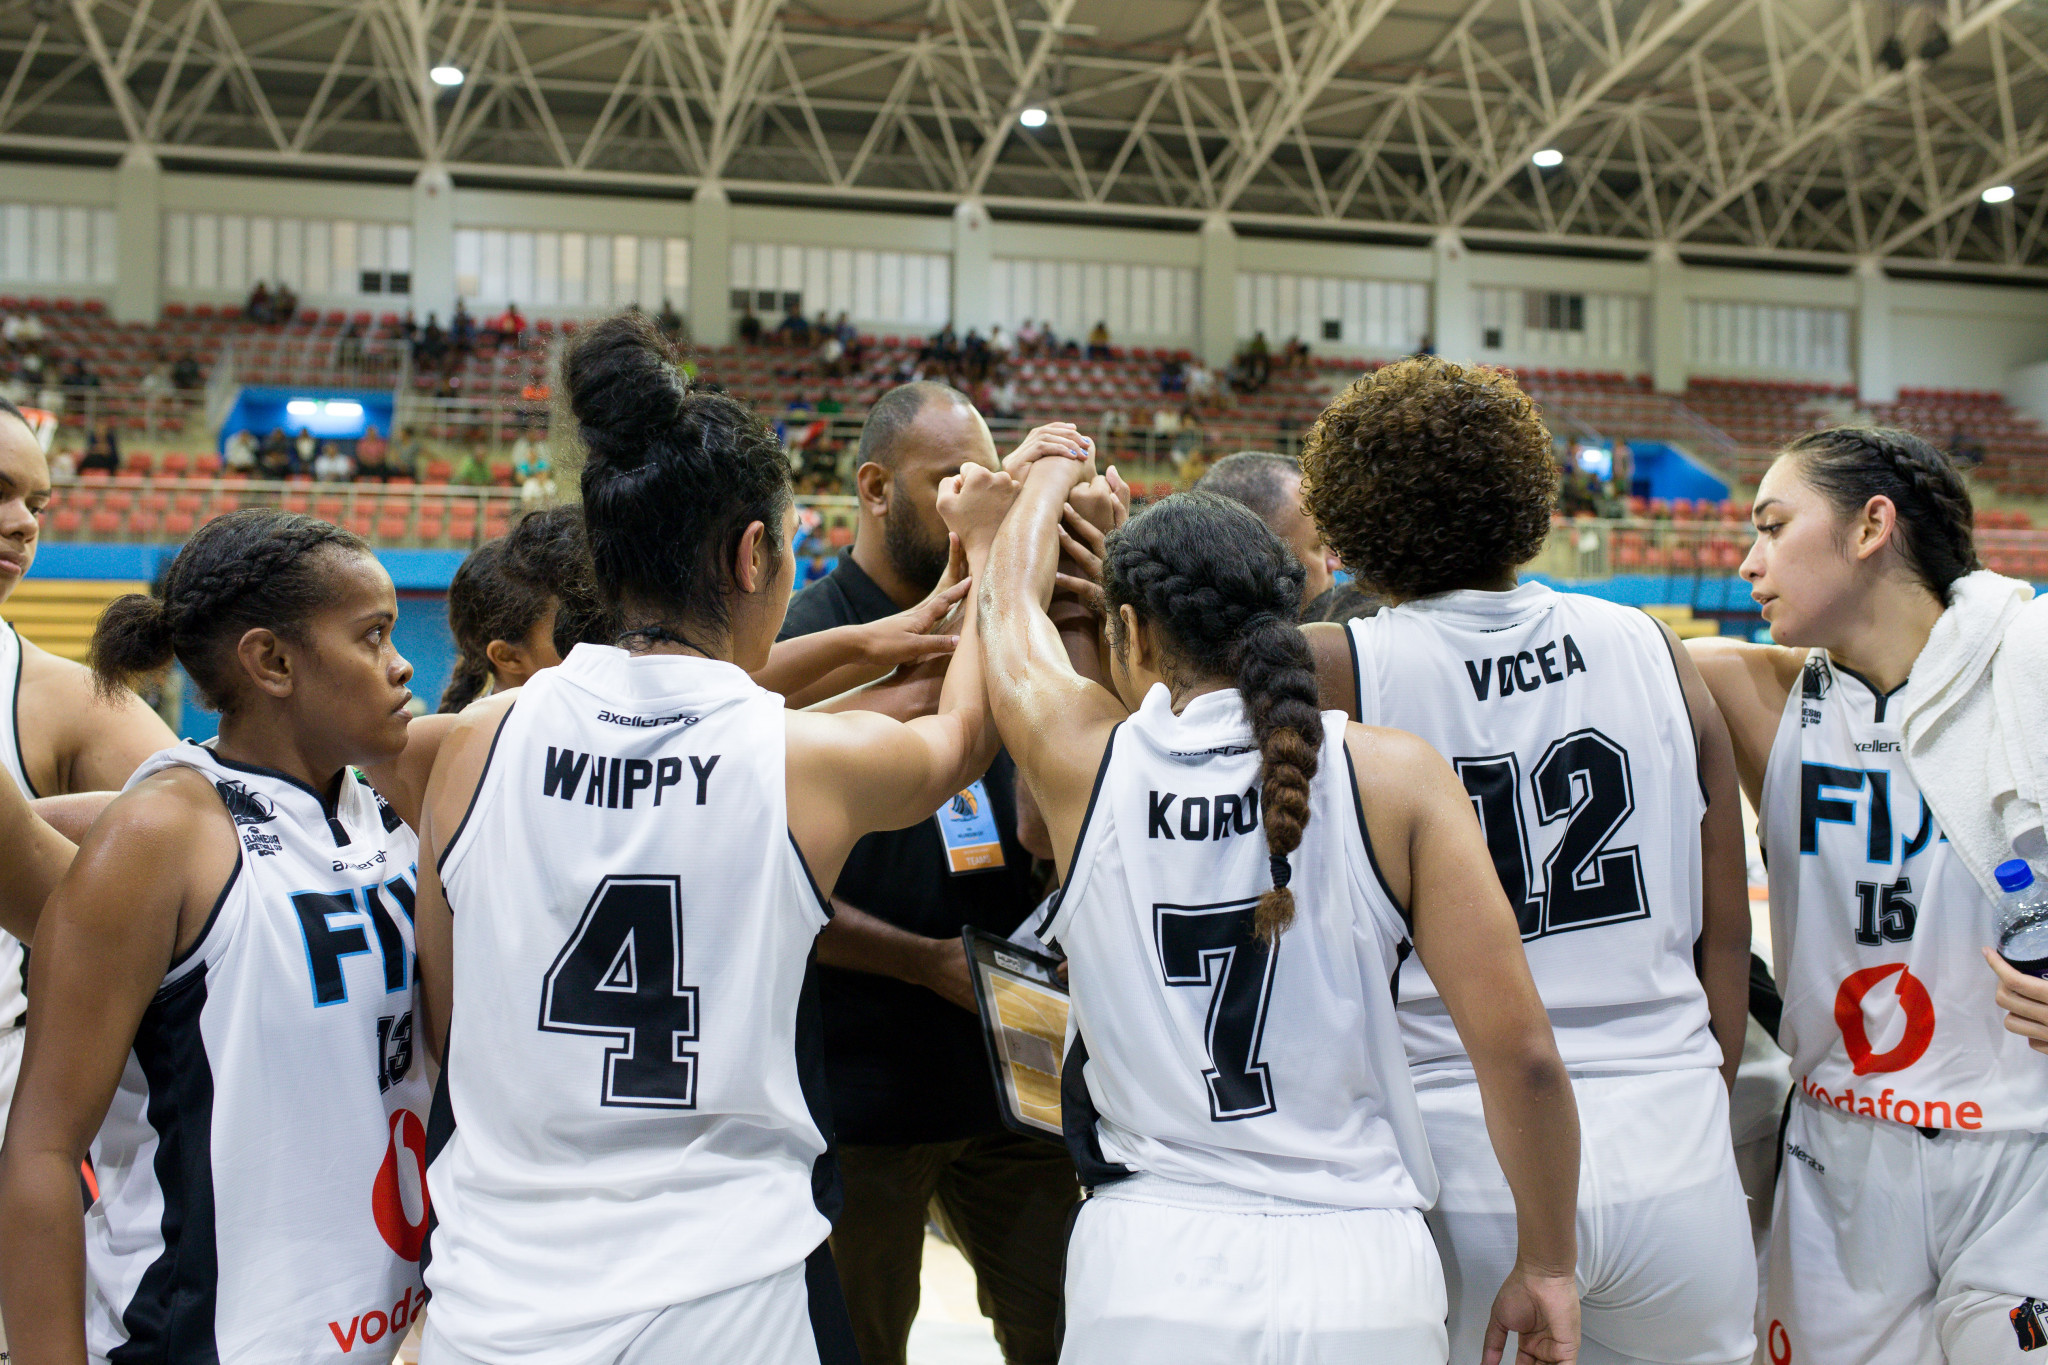 Fiji's women's basketball team will be looking to regain their title at Solomon Islands 2023 having lost in the final four years ago ©Basketball Fiji 